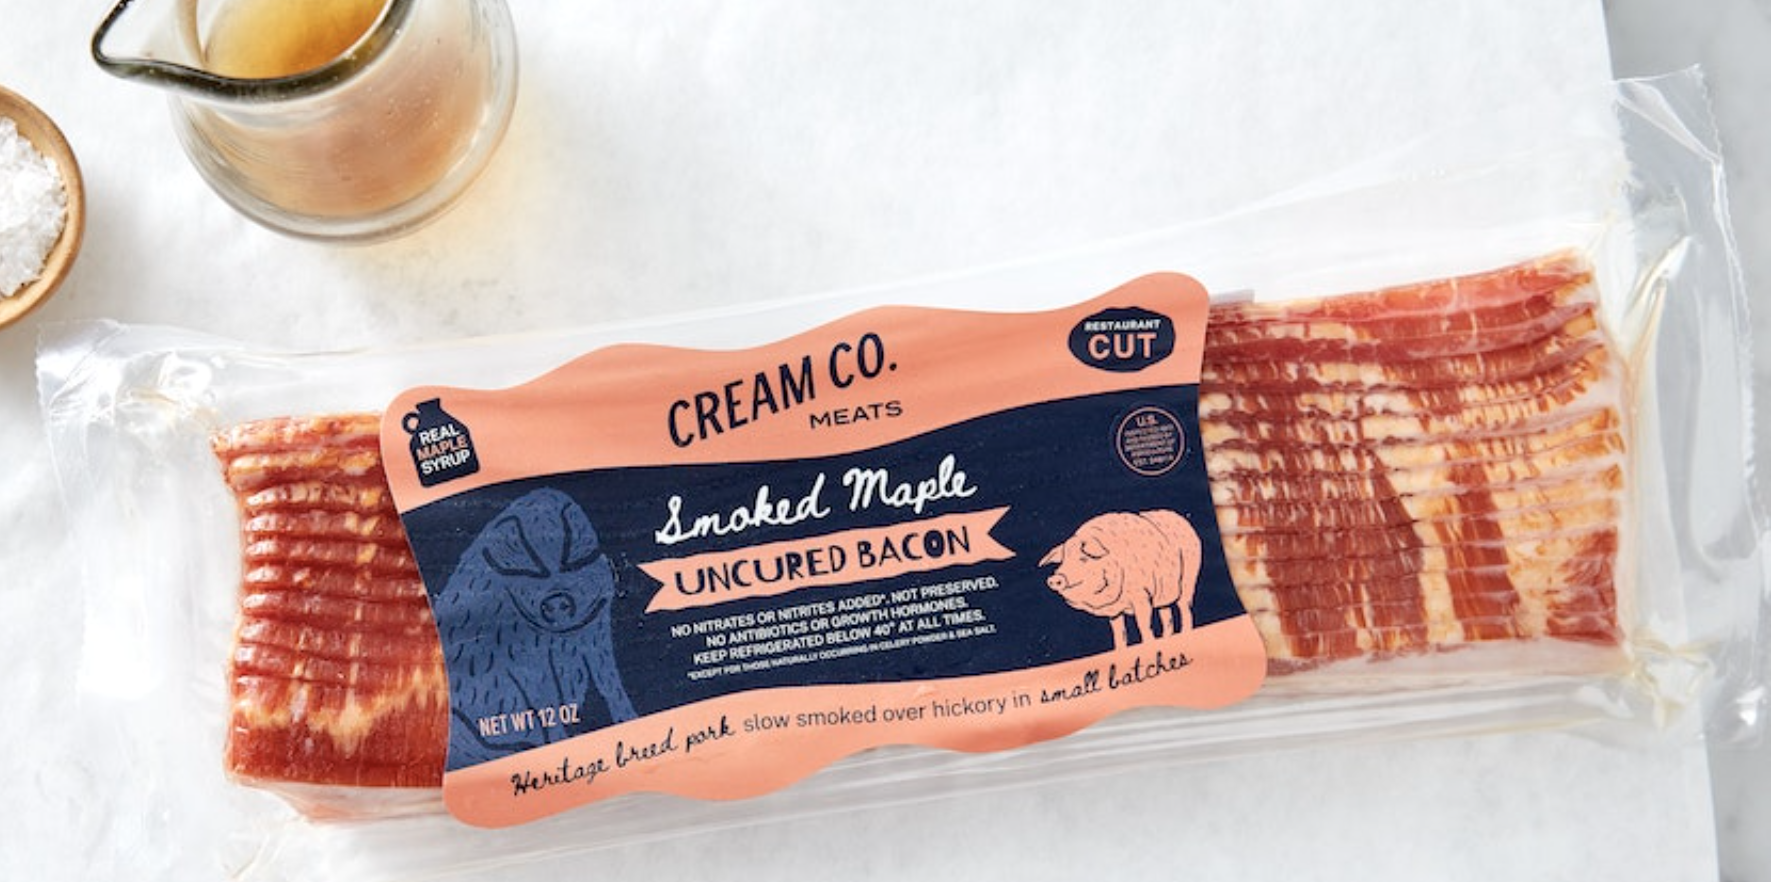 Picture of Cream Co. Meats -Smoked Maple Pork Bacon - Sliced 8 oz